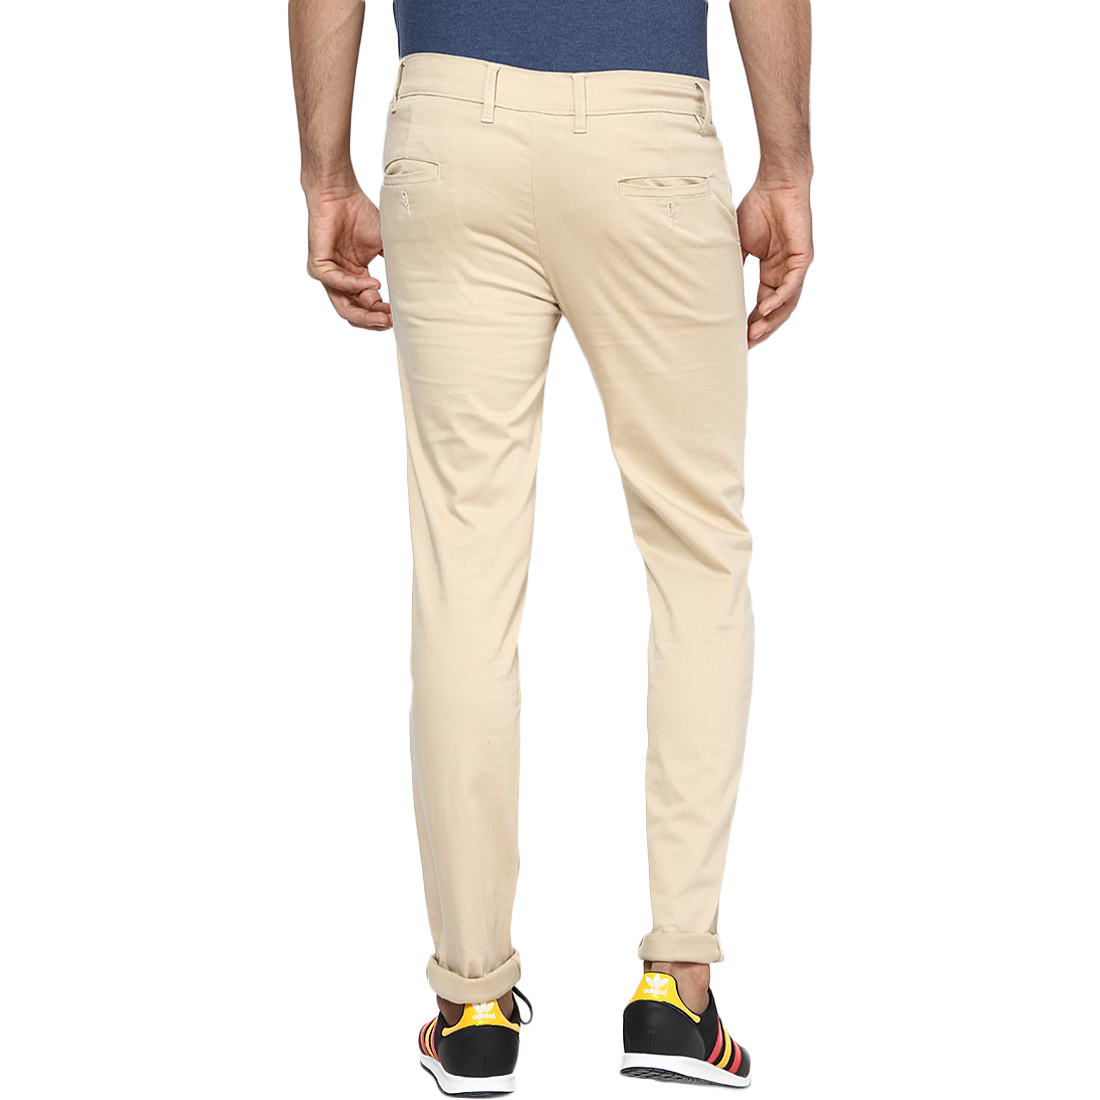 Buy Inspire Beige Slim Casual Chinos Online @ ₹629 from ShopClues